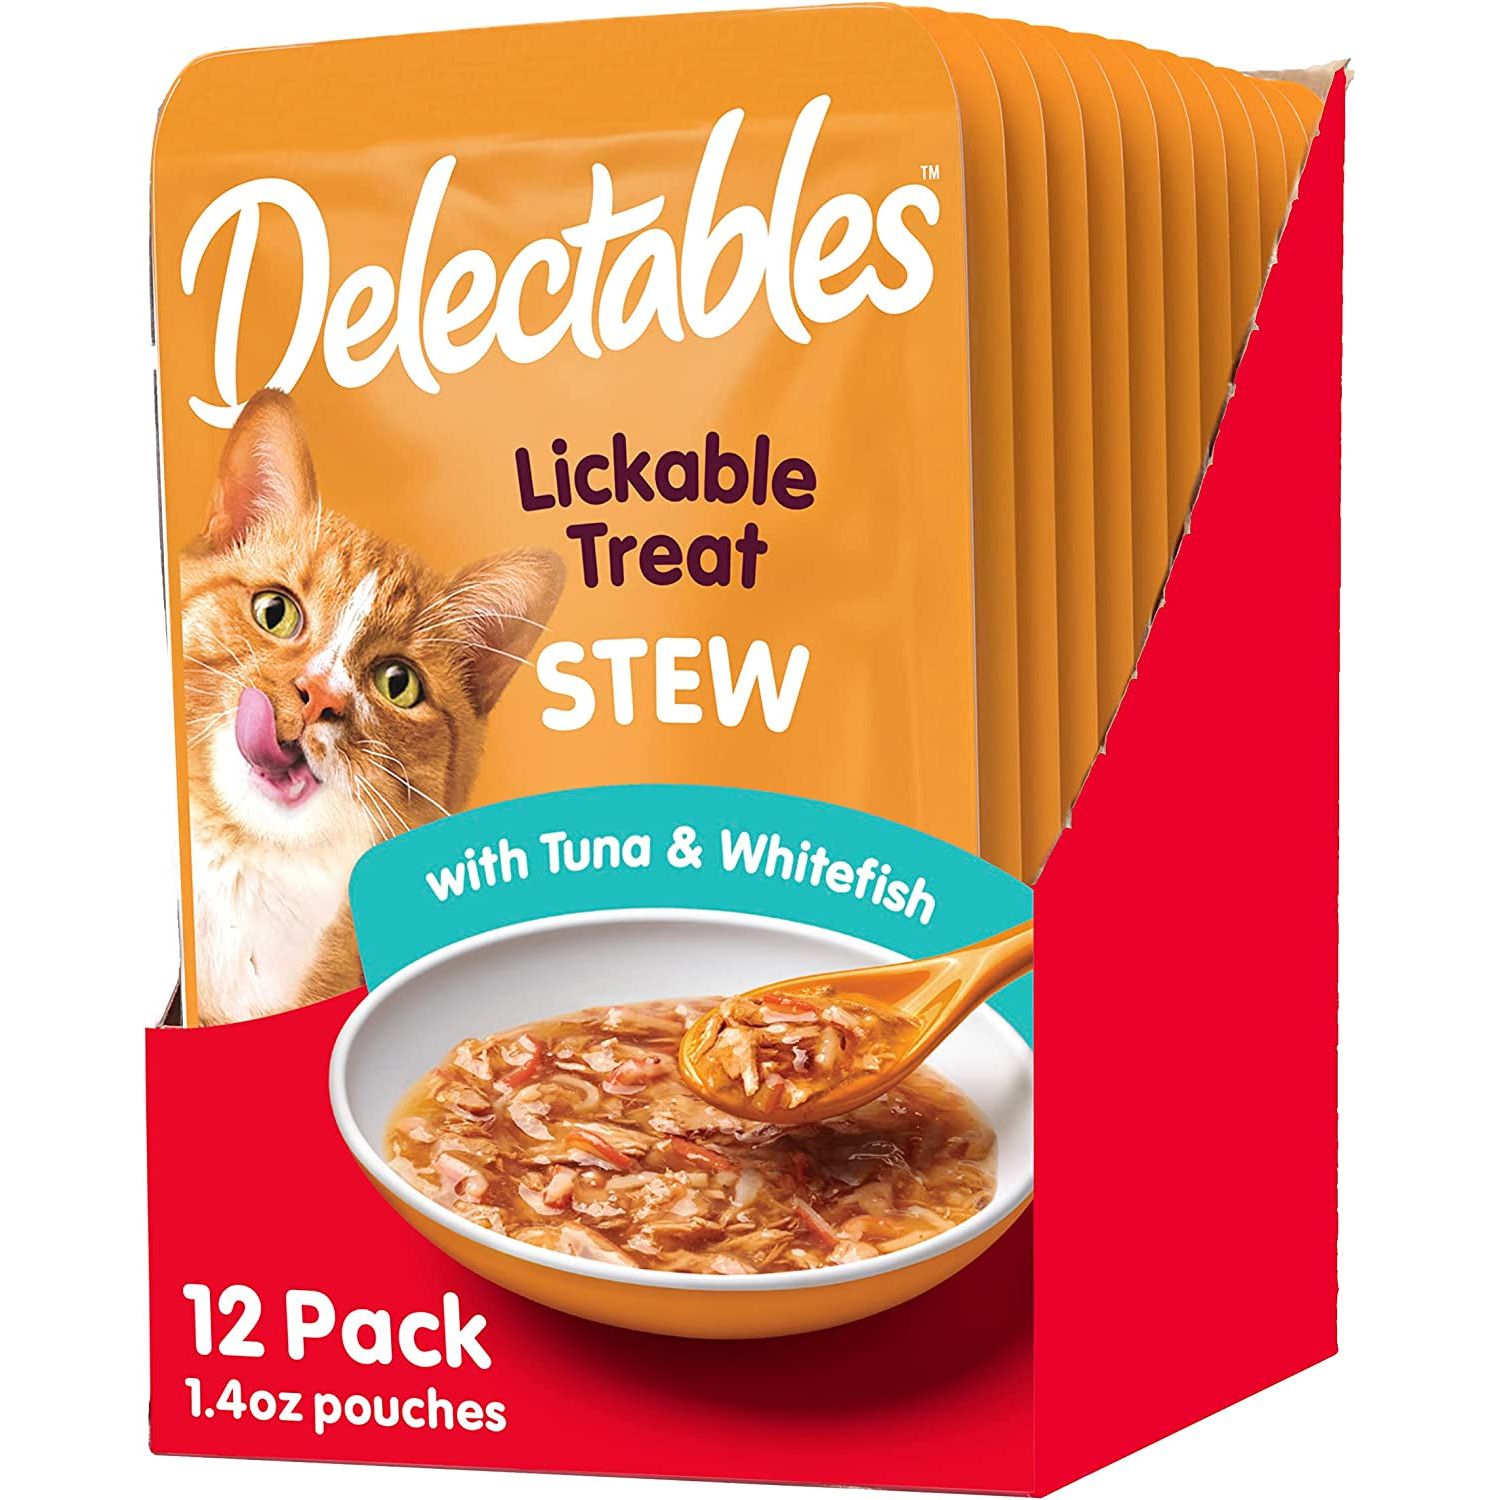 Delectables Stew Lickable Wet Cat Treats for Adult & Senior Cats, Variety Pack, 12 Count